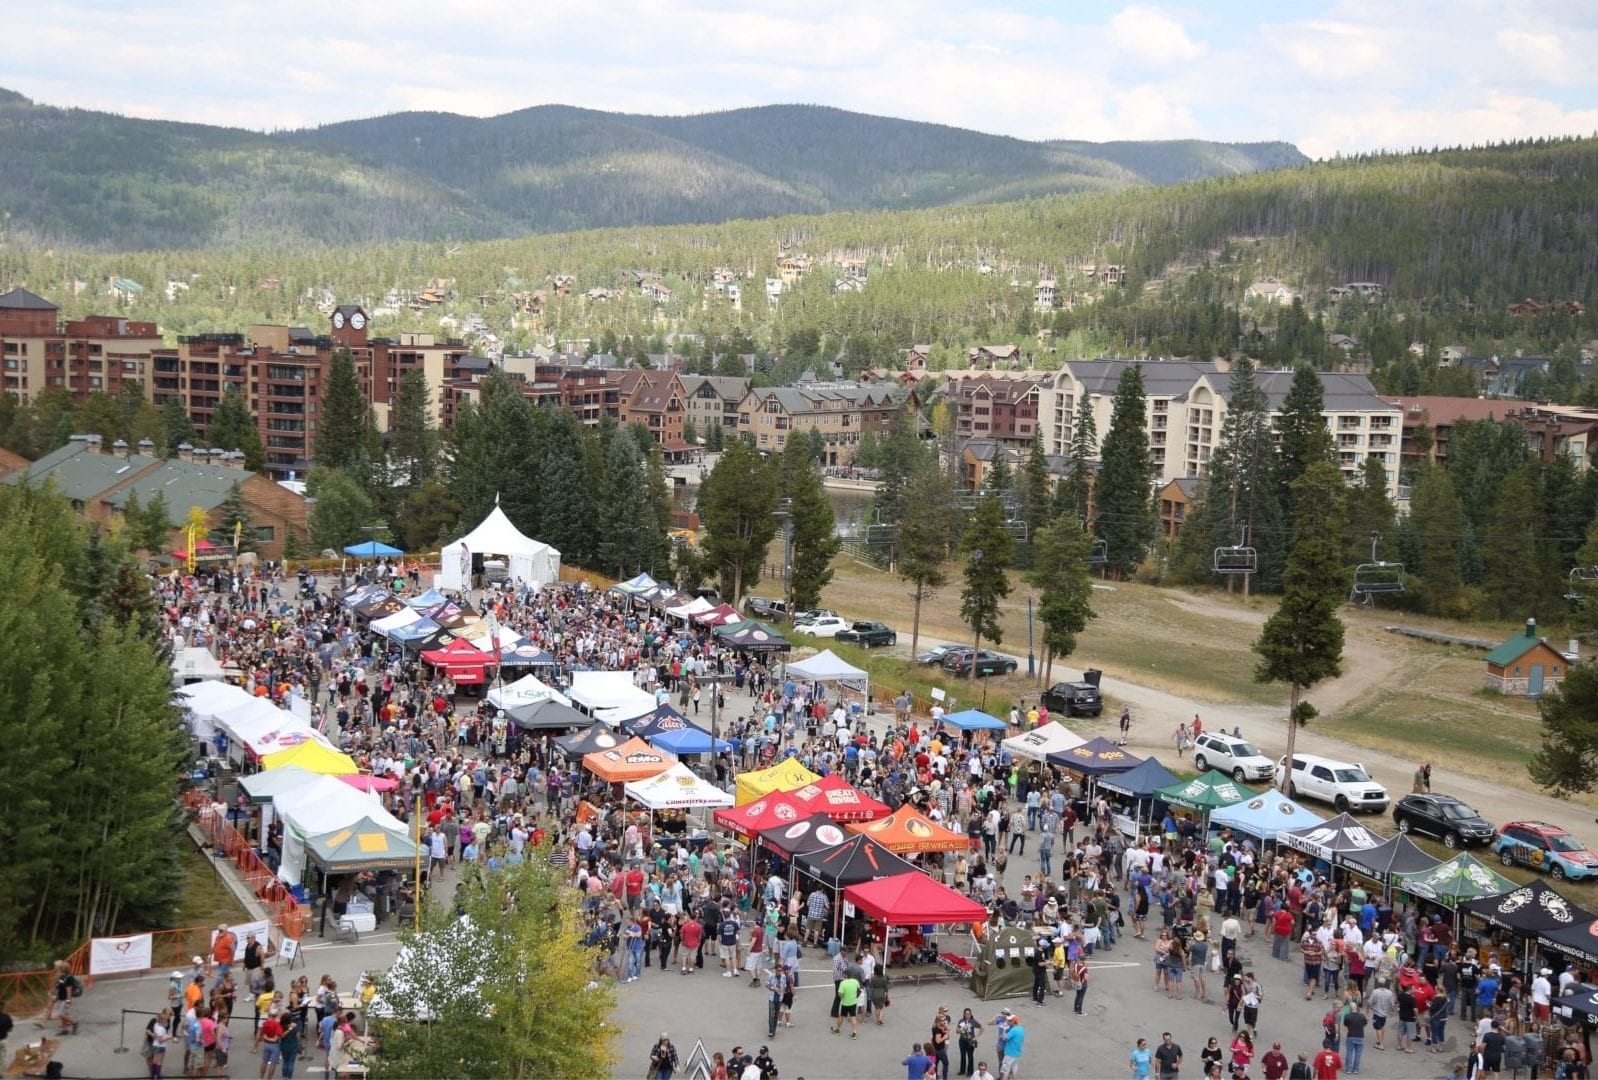 Breck Summer Beer Festival seen from above. 